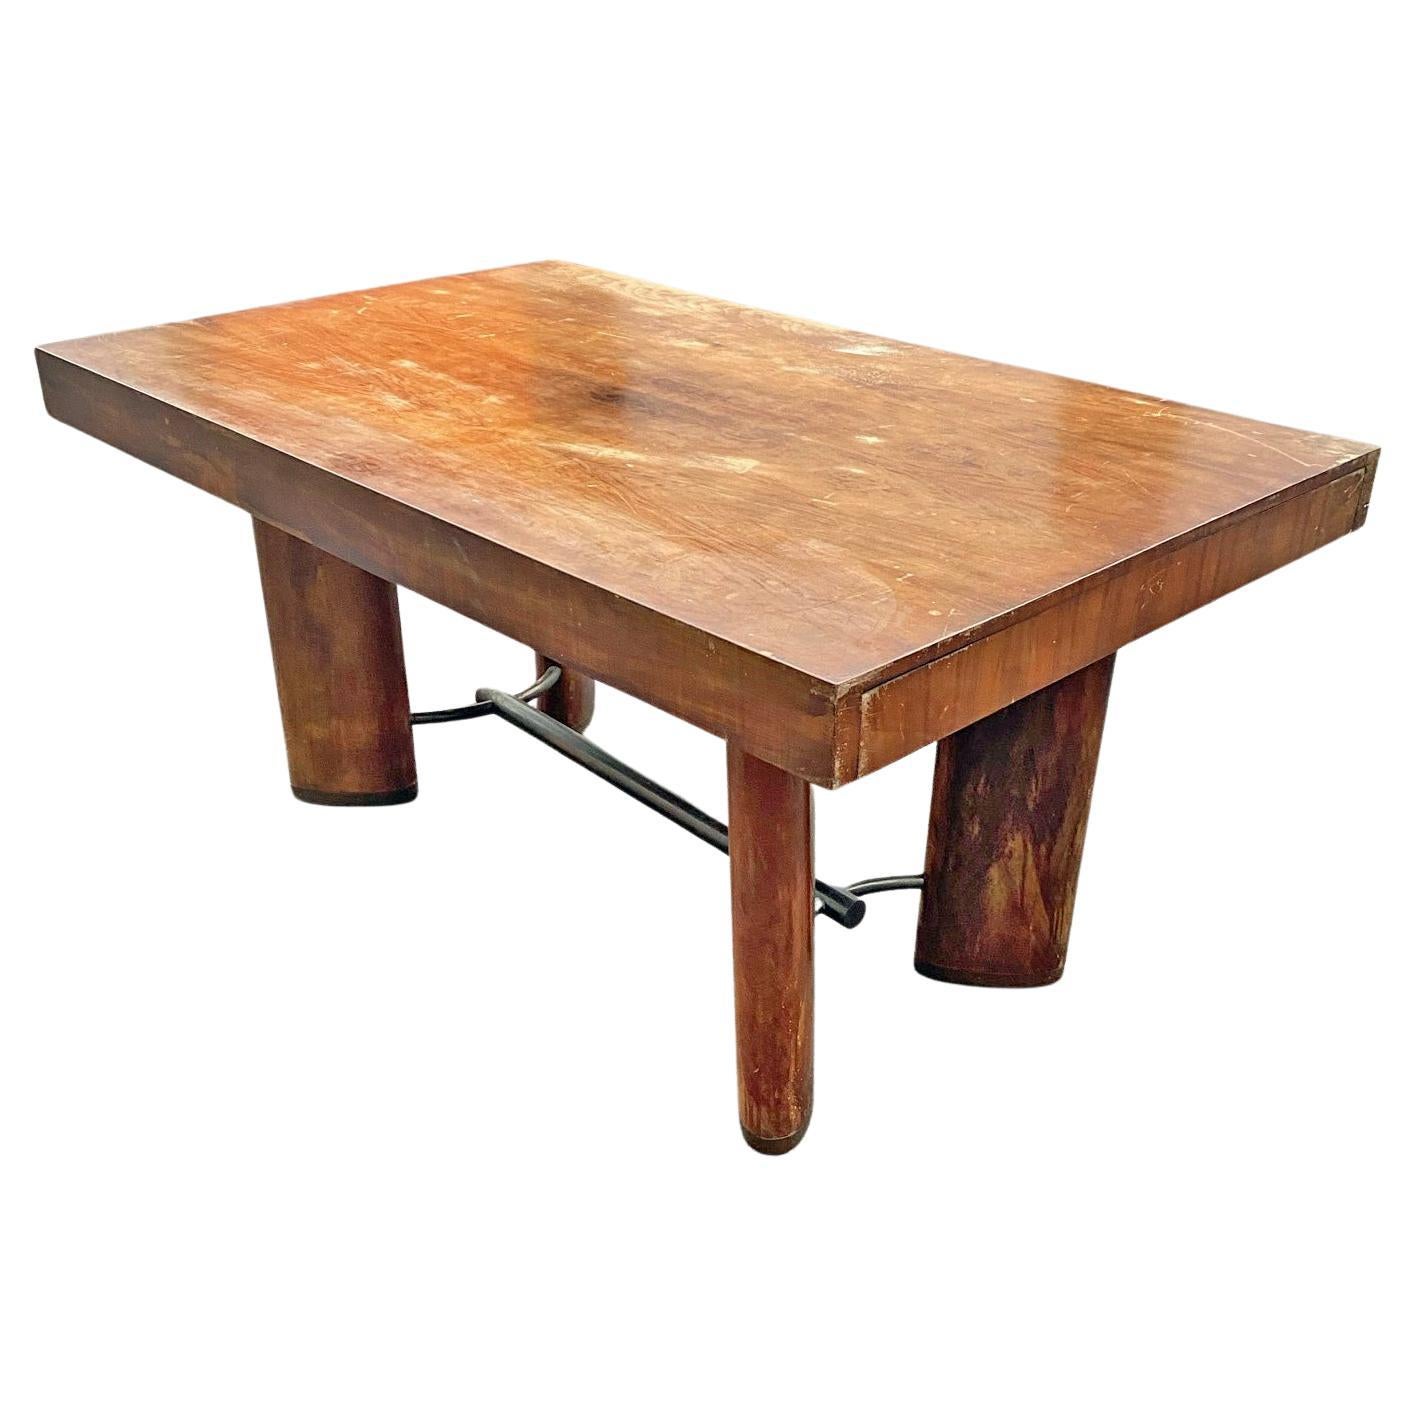 Modernist Art Deco Desk or Table in Walnut, Metal Spacer and Shoe, circa 1930 For Sale